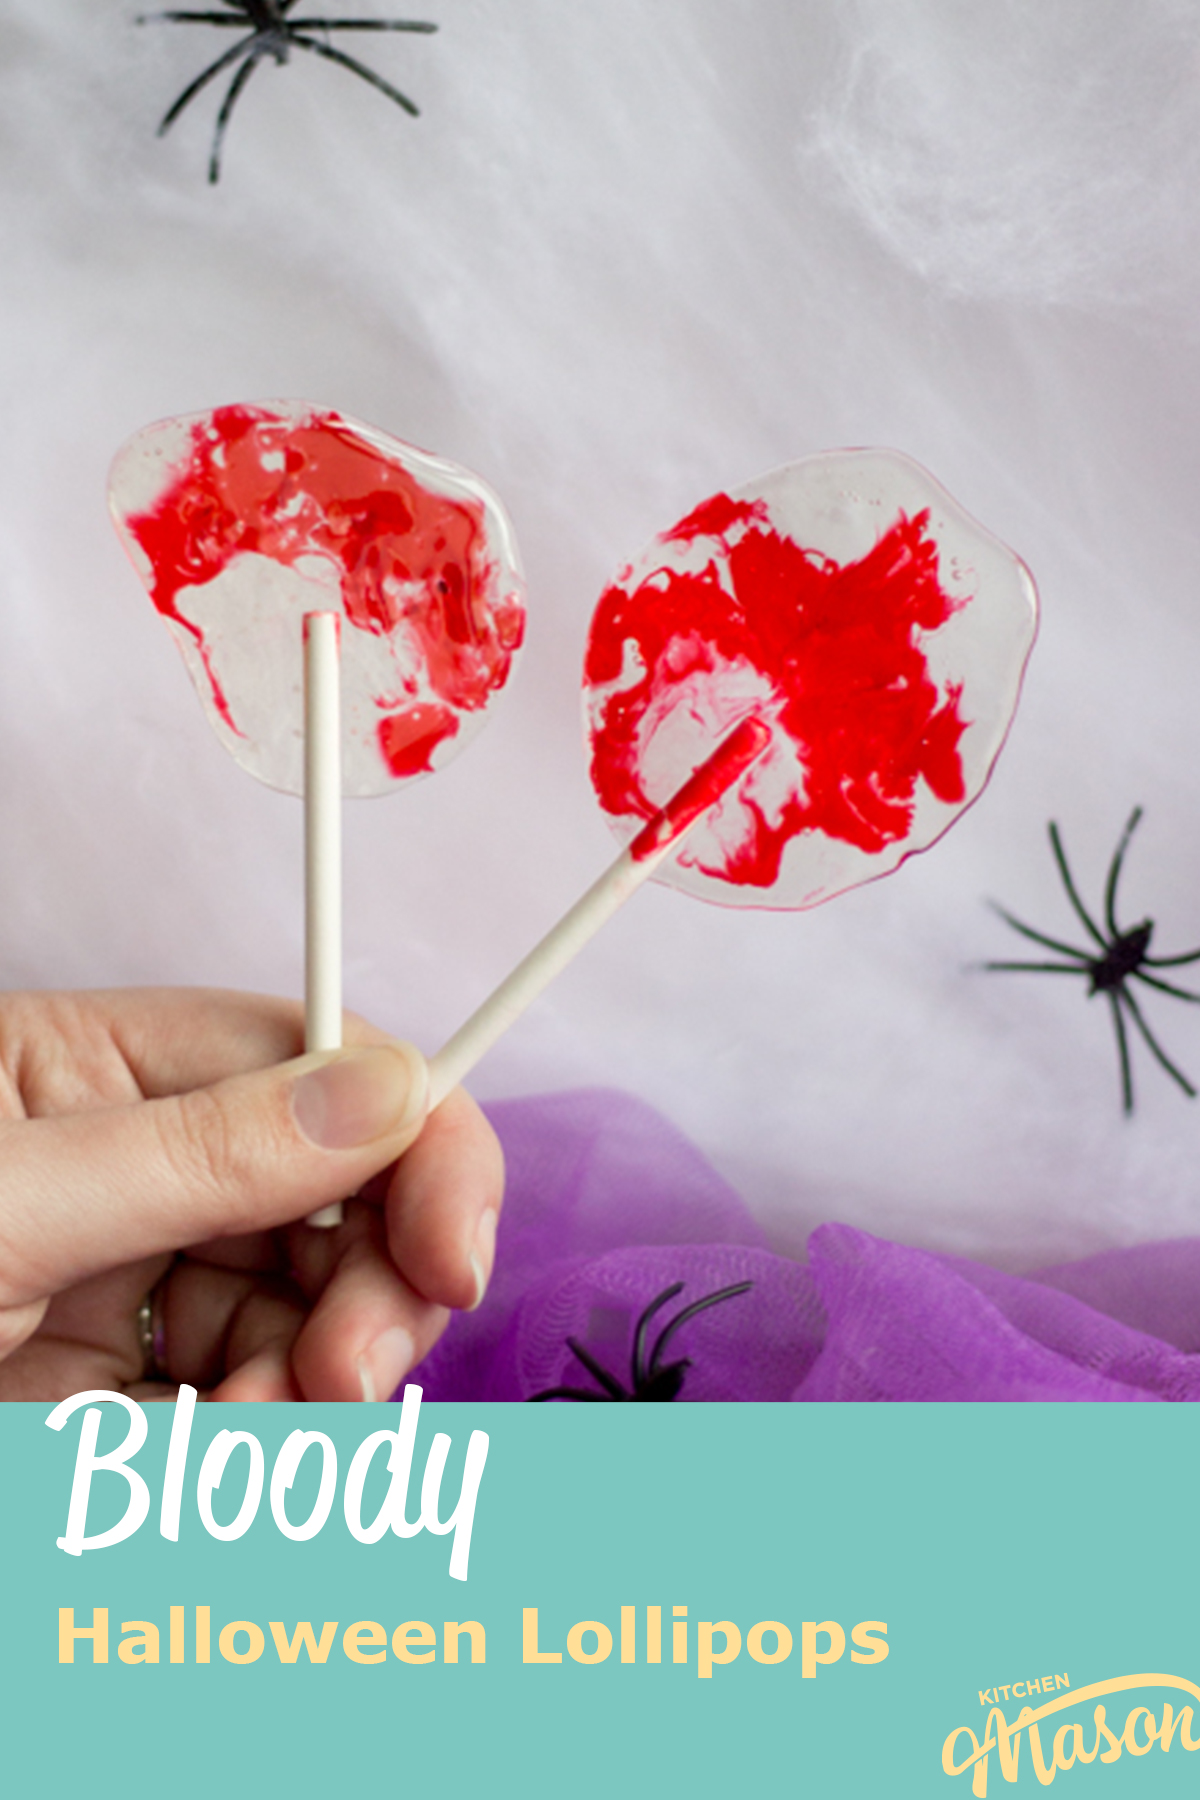 A hand holding 2 bloody Halloween lollipops against a white spider web background behind a base of purple netting. There are 3 black plastic spiders scattered around. A text overlay says "bloody Halloween lollipops".